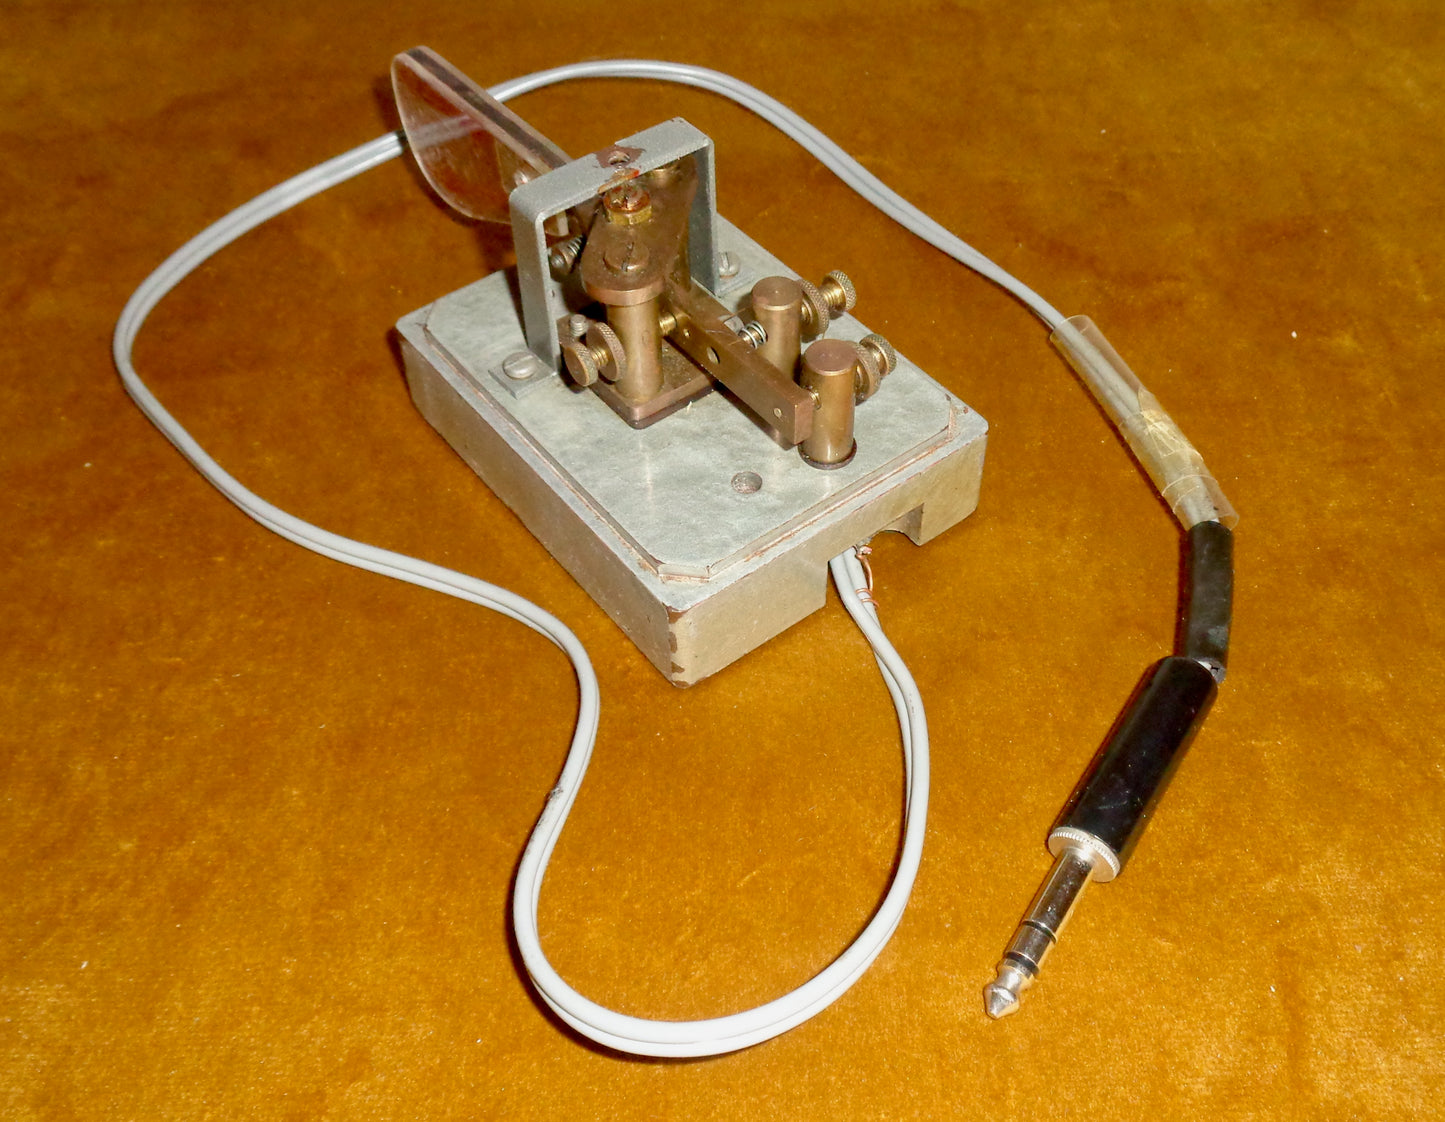 Marconi Bug/Paddle Morse Key Made For The Diplomatic Wireless Service (DWS)